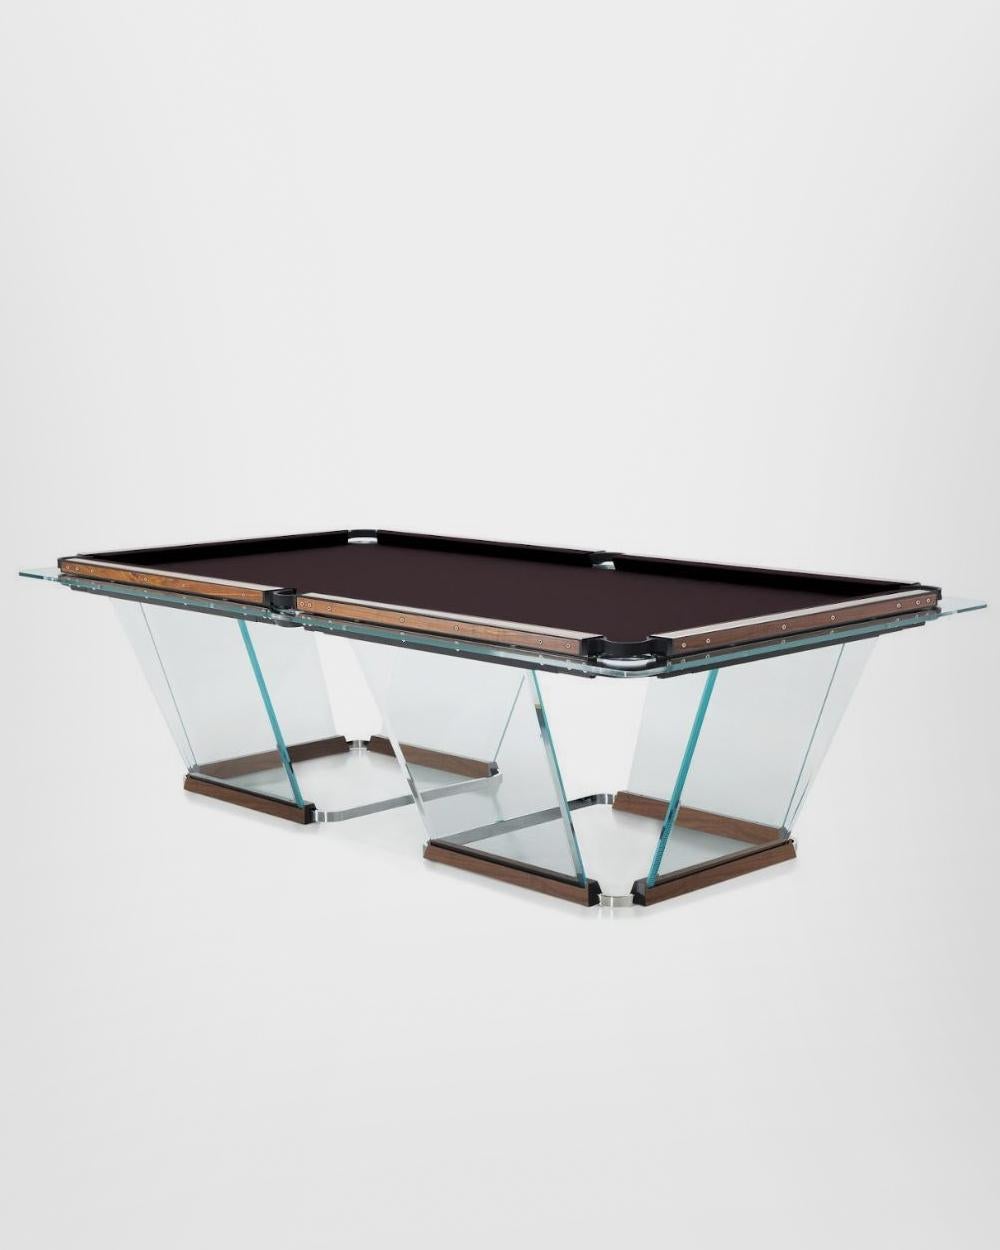 Contemporary Teckell T1.3 Crystal 8-foot Pool Table in Leather by Marc Sadler For Sale